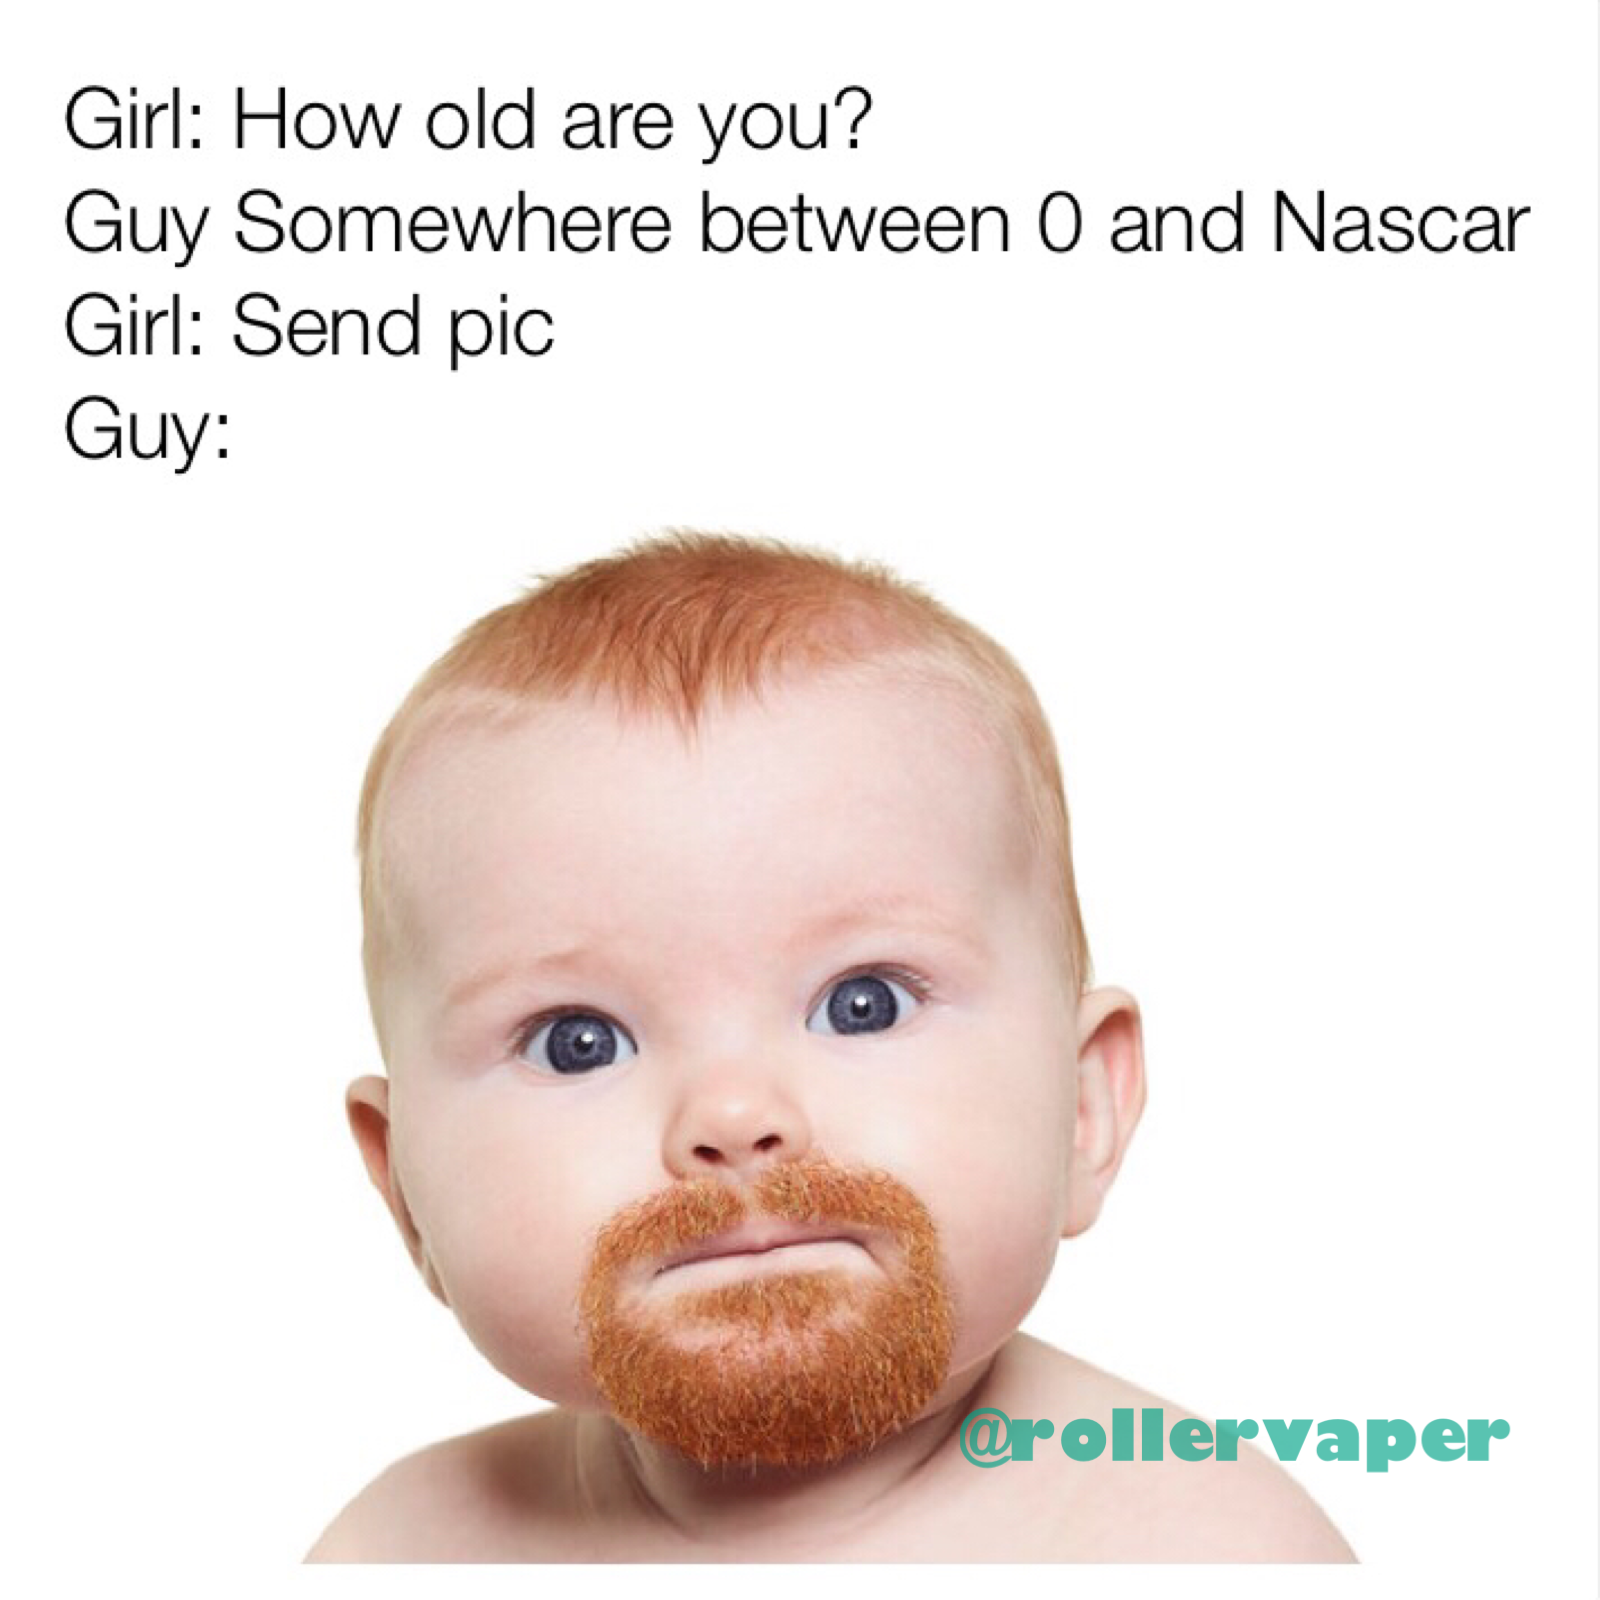 Meme of someone that is between the age of 0 and Nascar